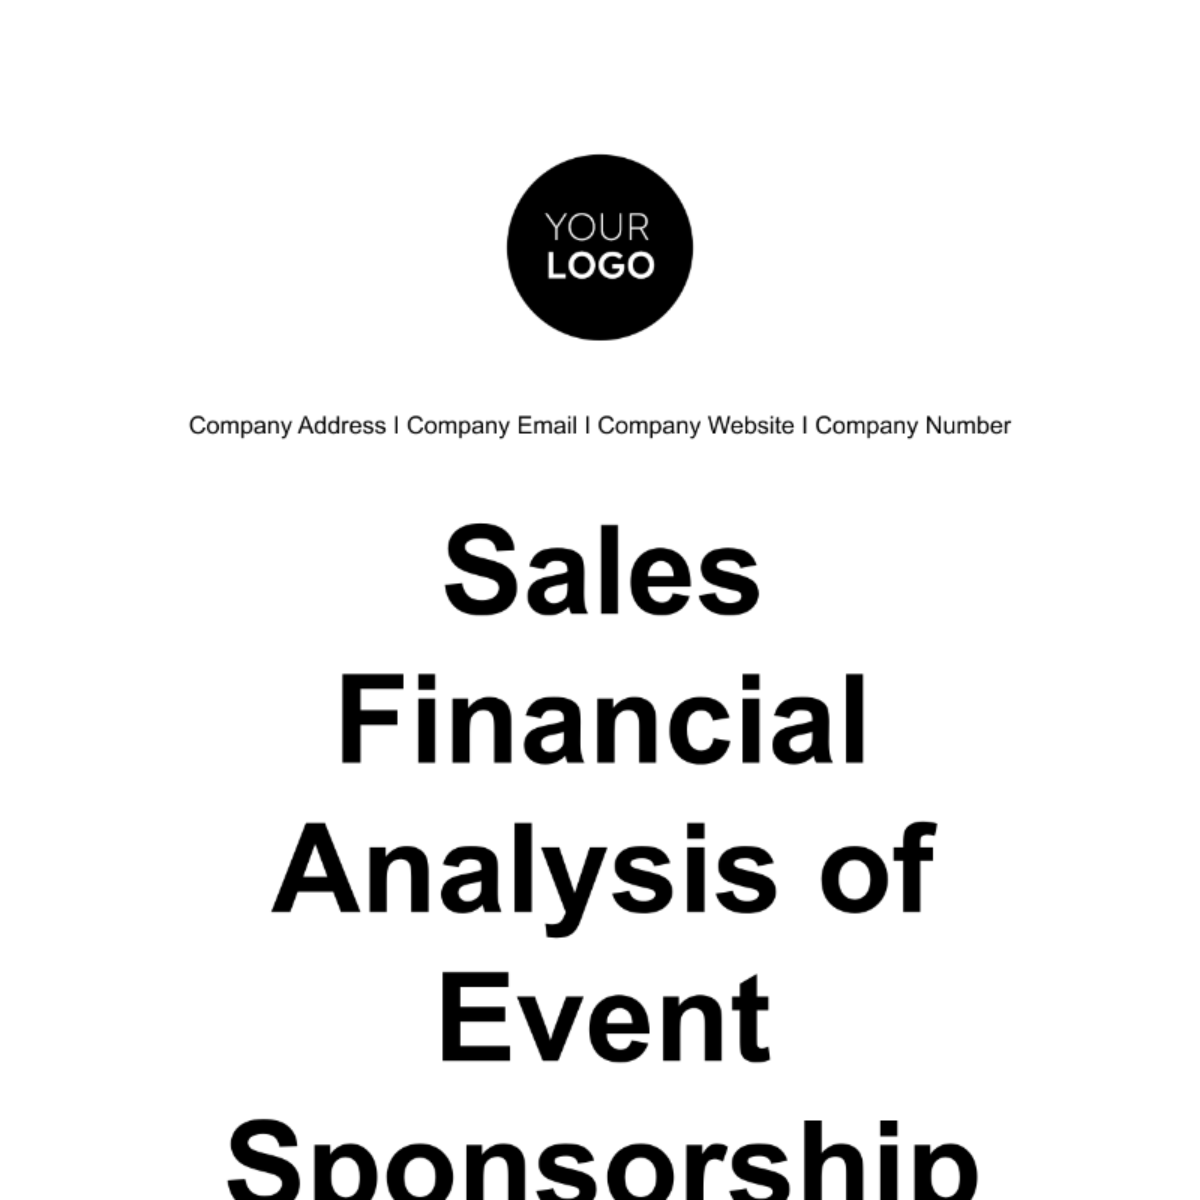 Free Sales Financial Analysis of Event Sponsorship Template